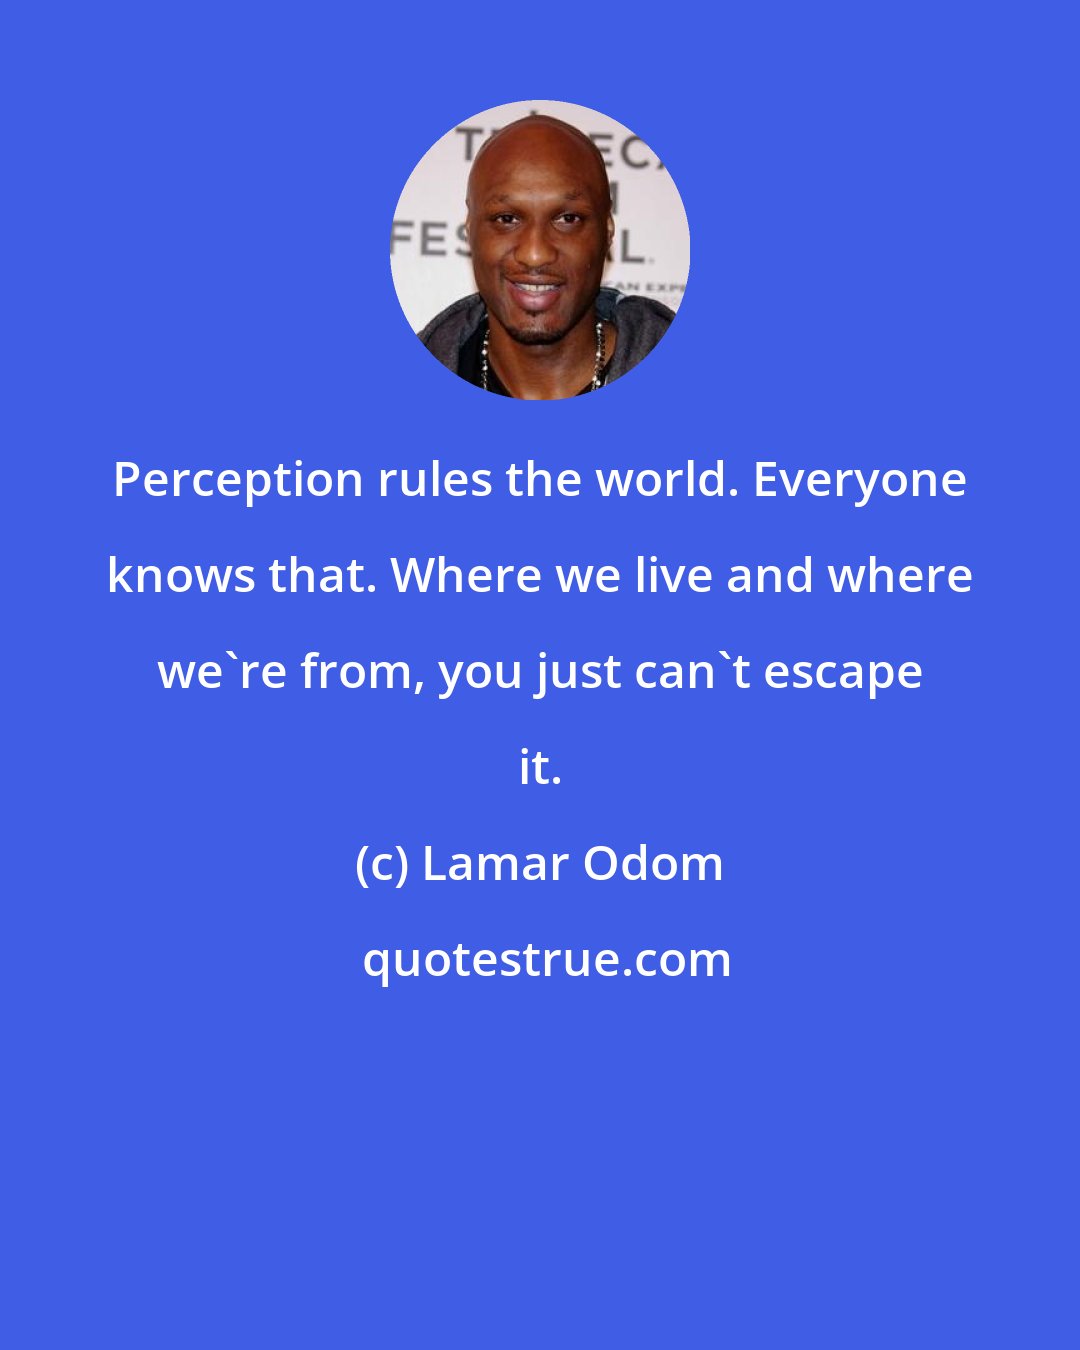 Lamar Odom: Perception rules the world. Everyone knows that. Where we live and where we're from, you just can't escape it.